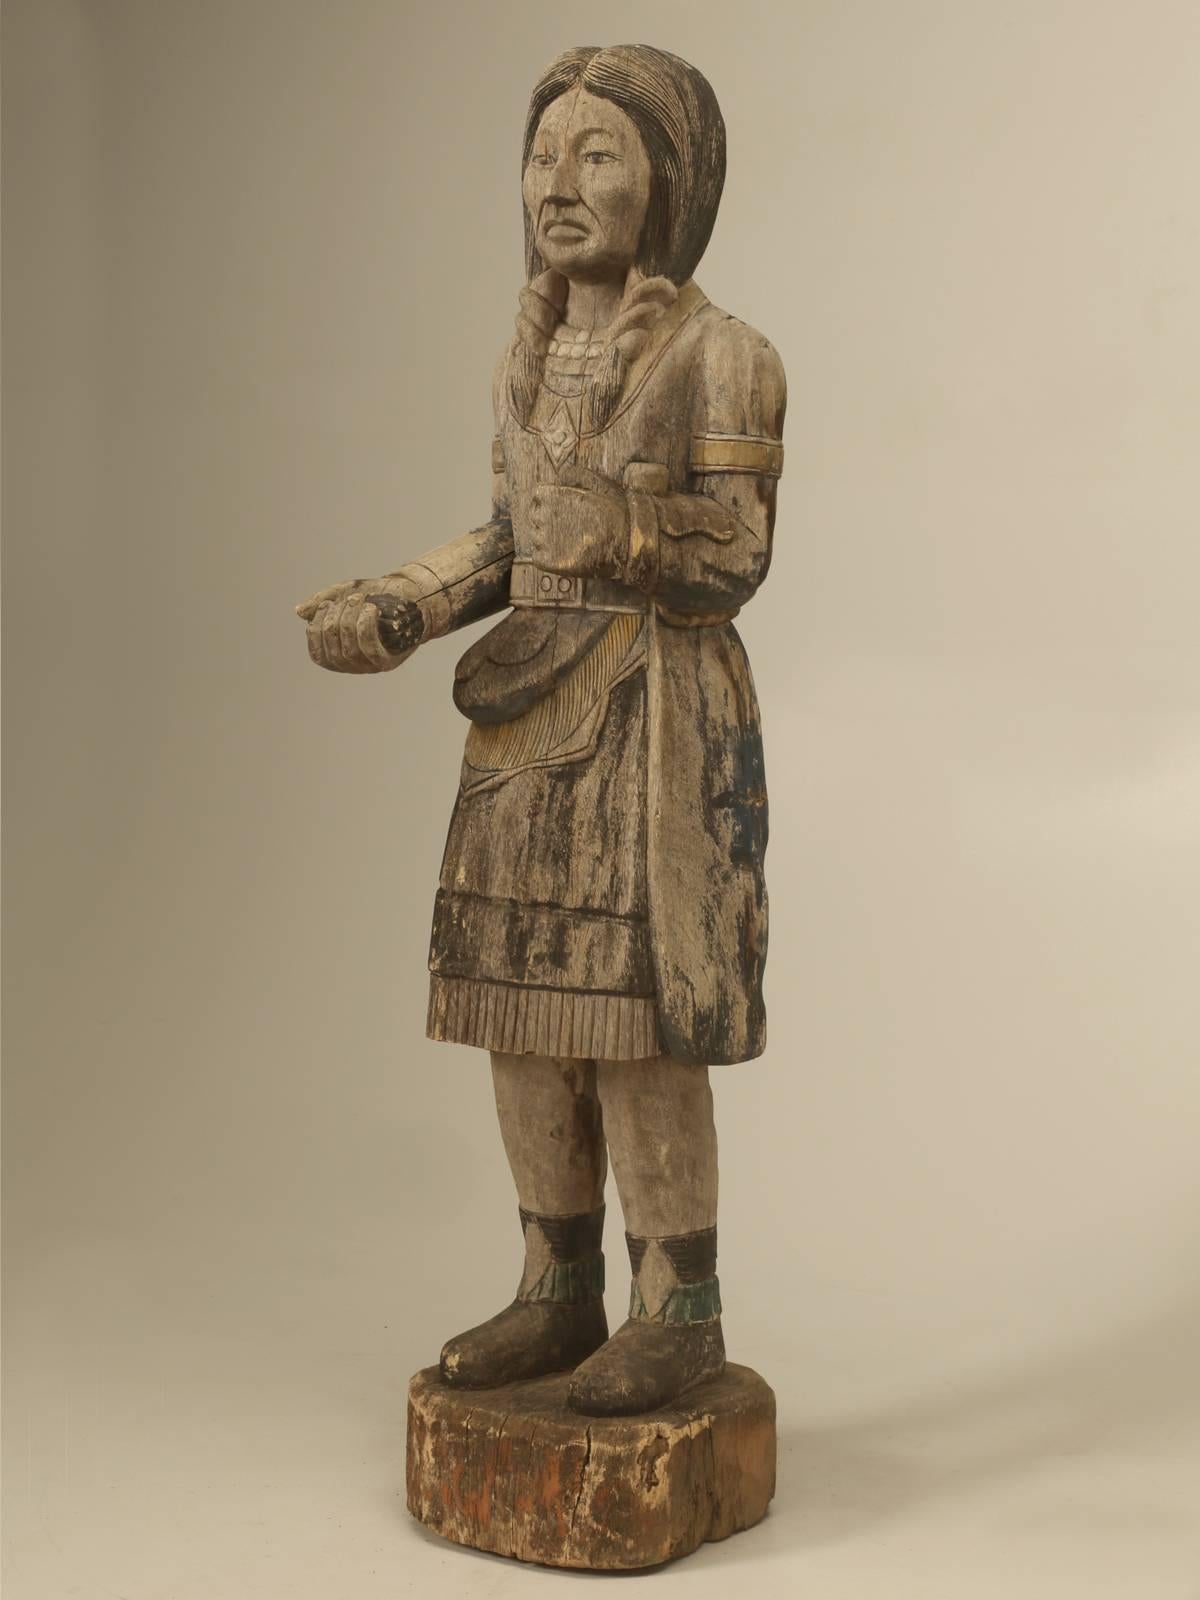 Cigar store Indian and although it appears to be turn-of-the-century, we think it could be made in the 1950s and remains in unrestored condition with great patina.
The Cigar Indians first appeared in the late 1600s on the European continent and